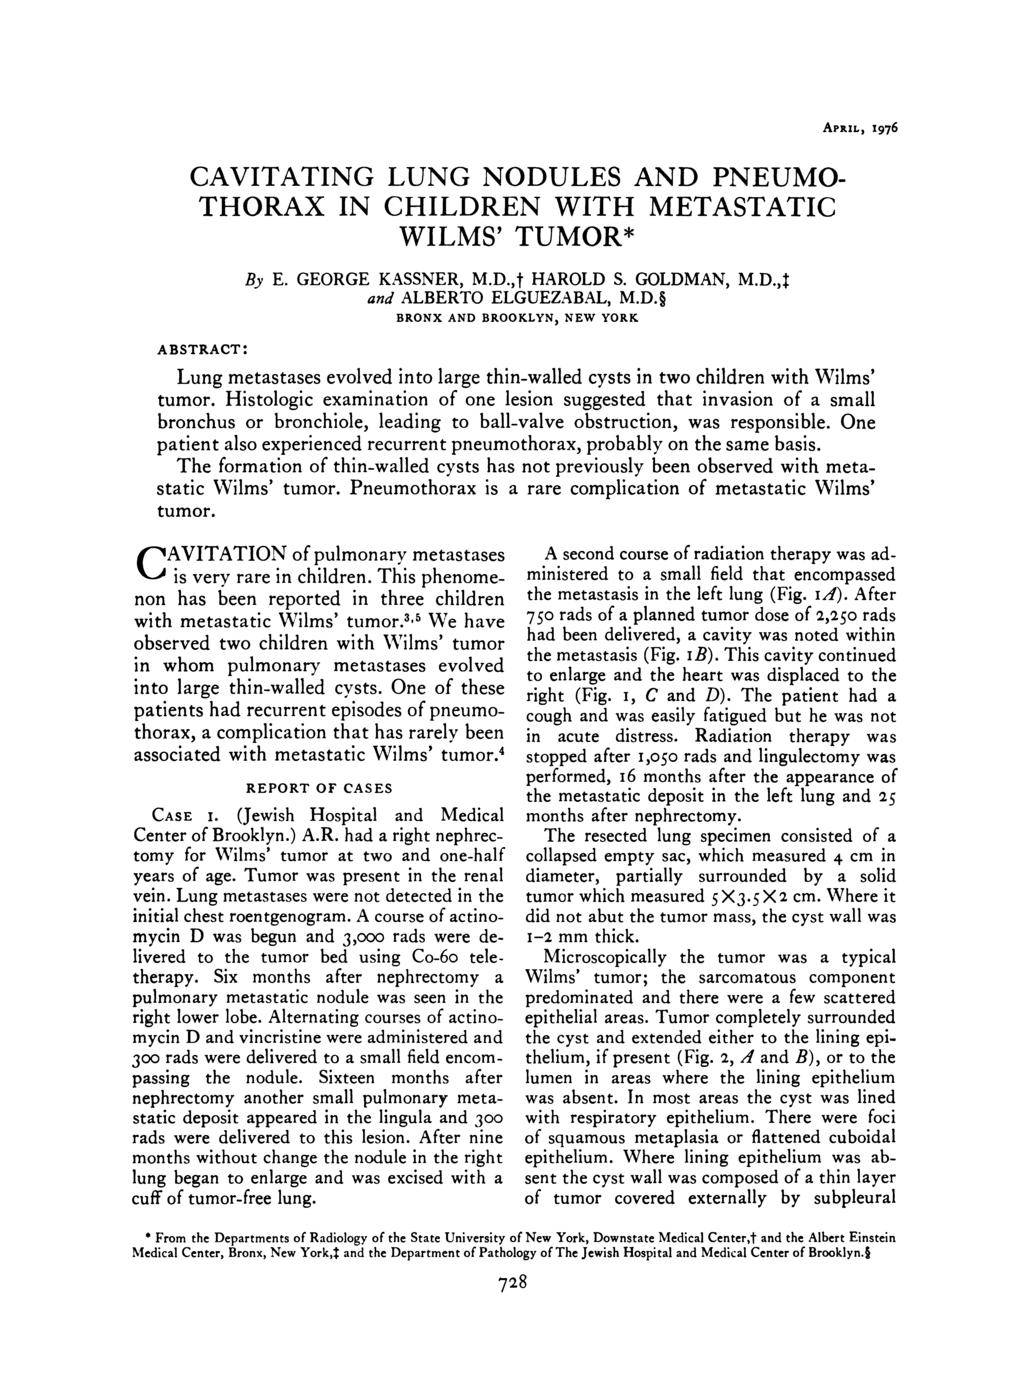 APRIL, 1976 ABSTRACT: CAVITATING LUNG NODULES AND PNEUMO- THORAX IN CHILDREN WITH METASTATIC WILMS TUMOR* By E. GEORGE KASSNER, M.D.,t HAROLD S. GOLDMAN, M.D.4 and ALBERTO ELGUEZABAL, M.D. BRONX AND BROOKLYN, NEW YORK Lung metastases evolved into large thin-walled Cysts in two children with Wilms tumor.